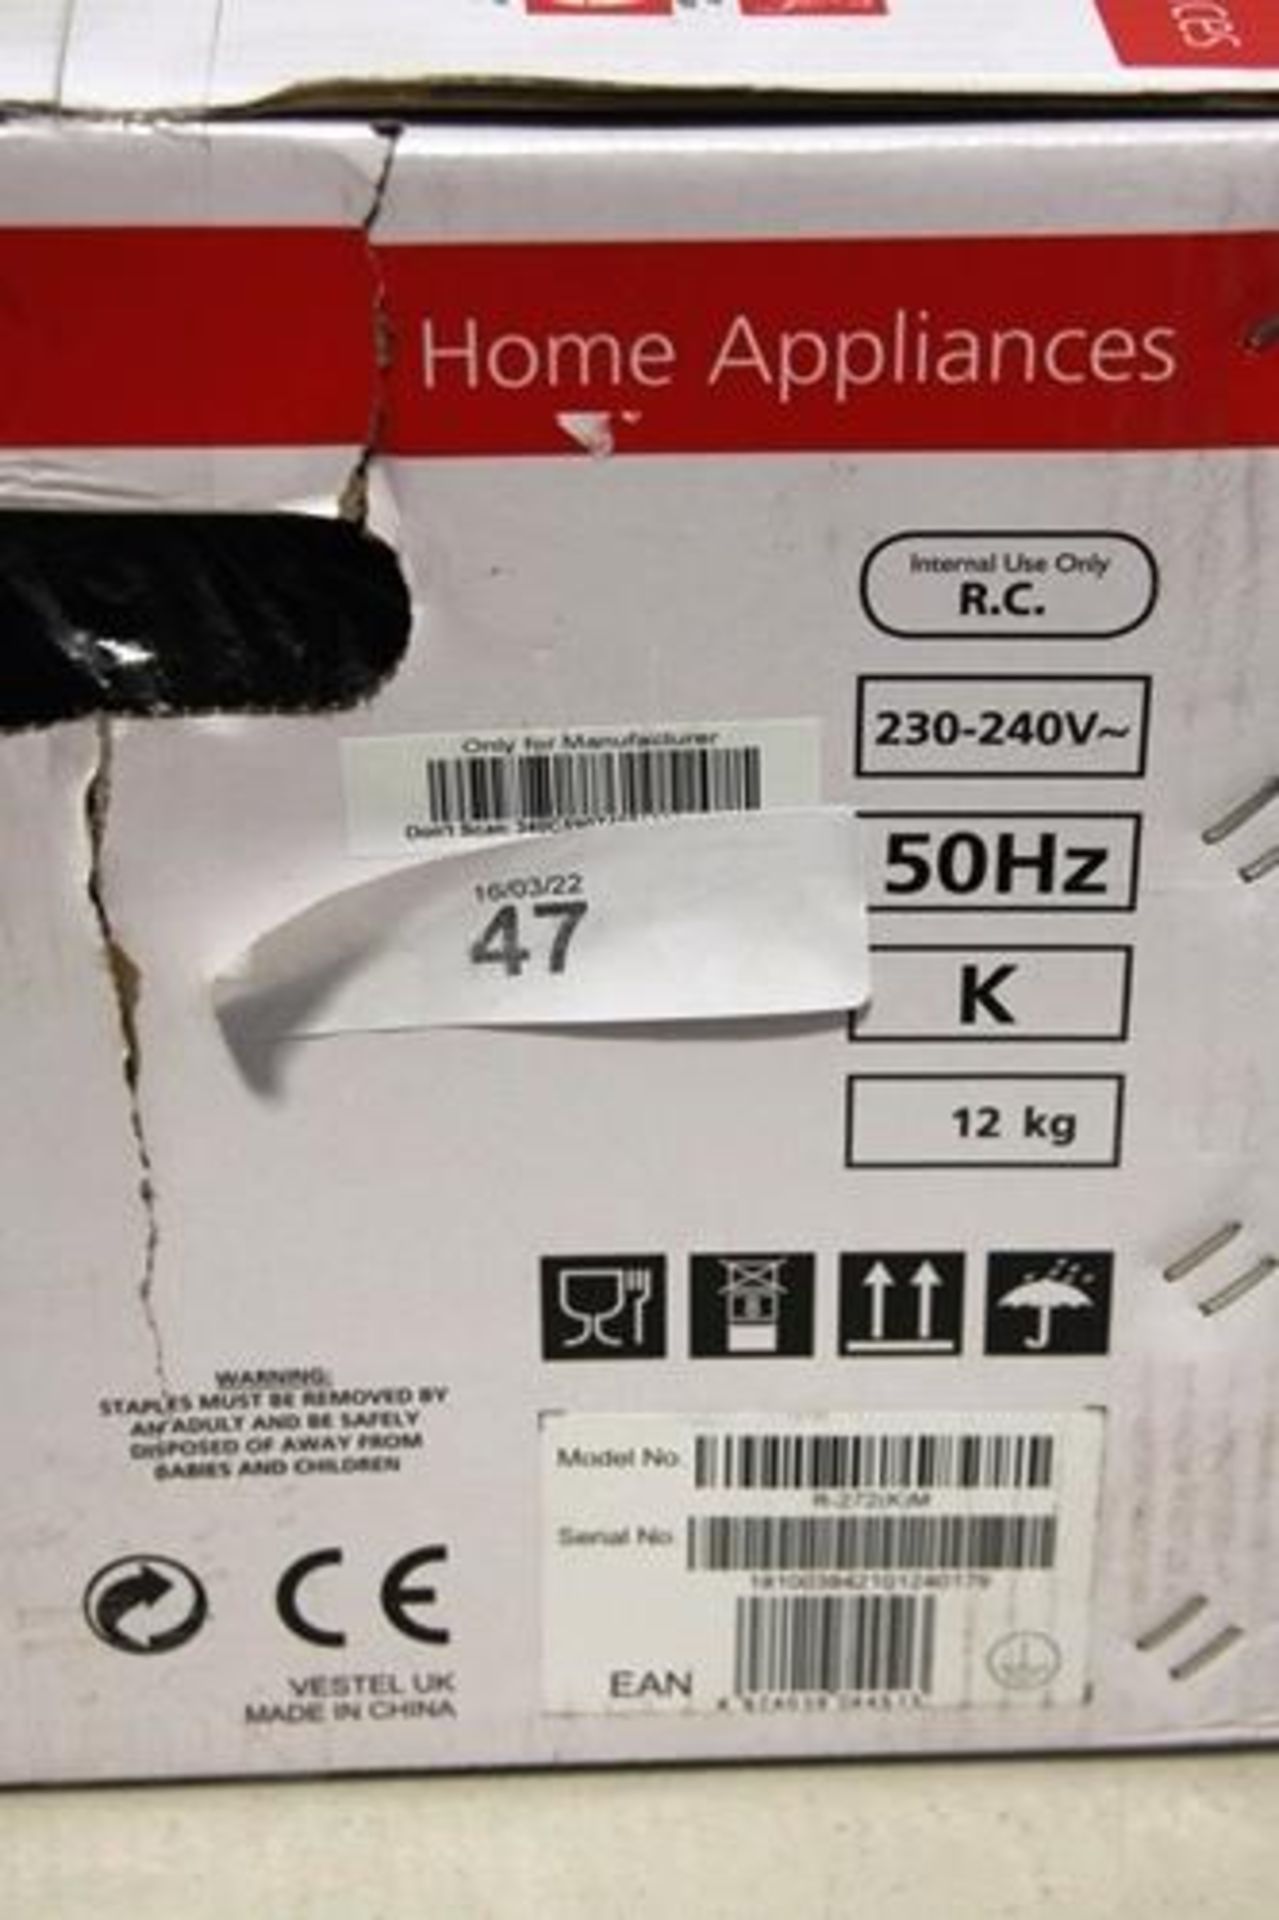 1 x Sharp R-272 KM microwave oven - Sealed new in box (ES1) - Image 2 of 2